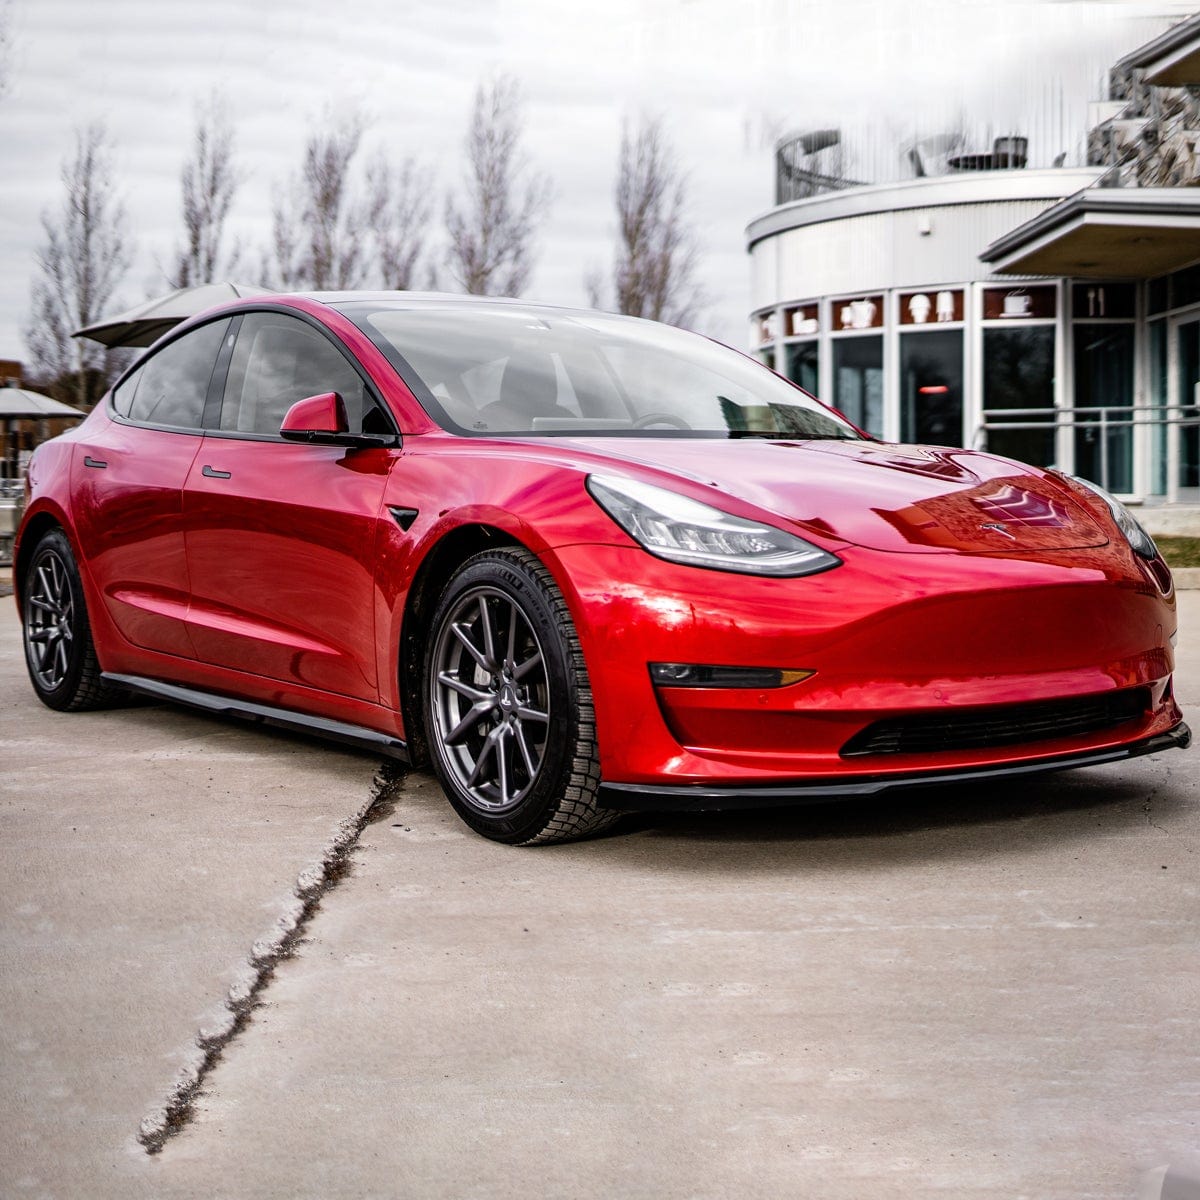 ACS Composite Tesla Model 3 Splitter in Gloss Black Painted [51-4-003]GBA - Front View